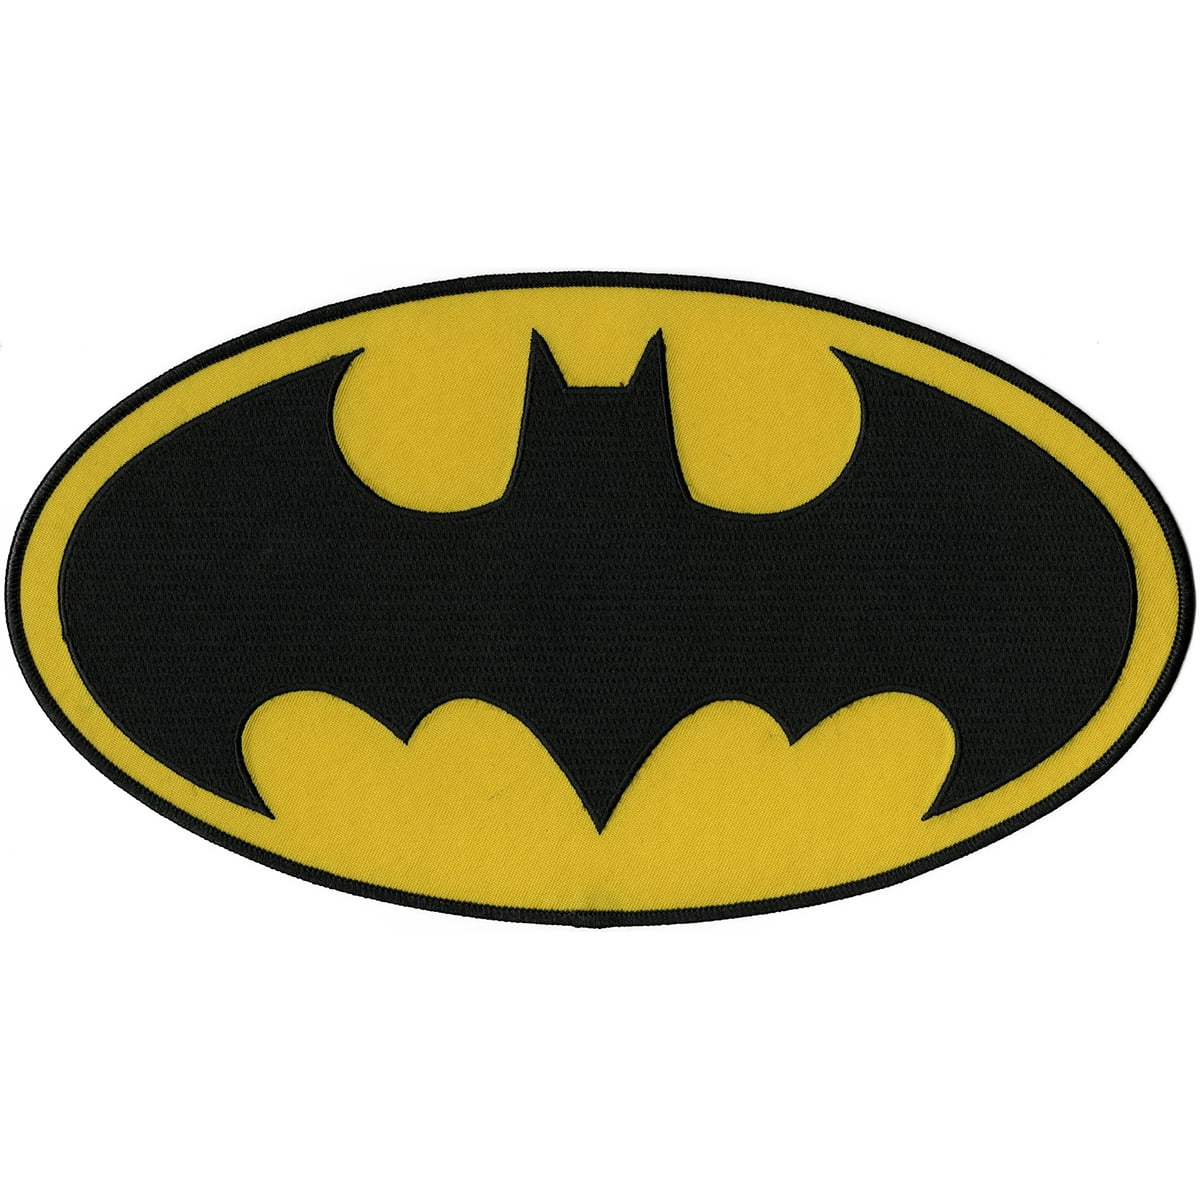 Wow iron sew on patch comic novelty batman embroidered badge 